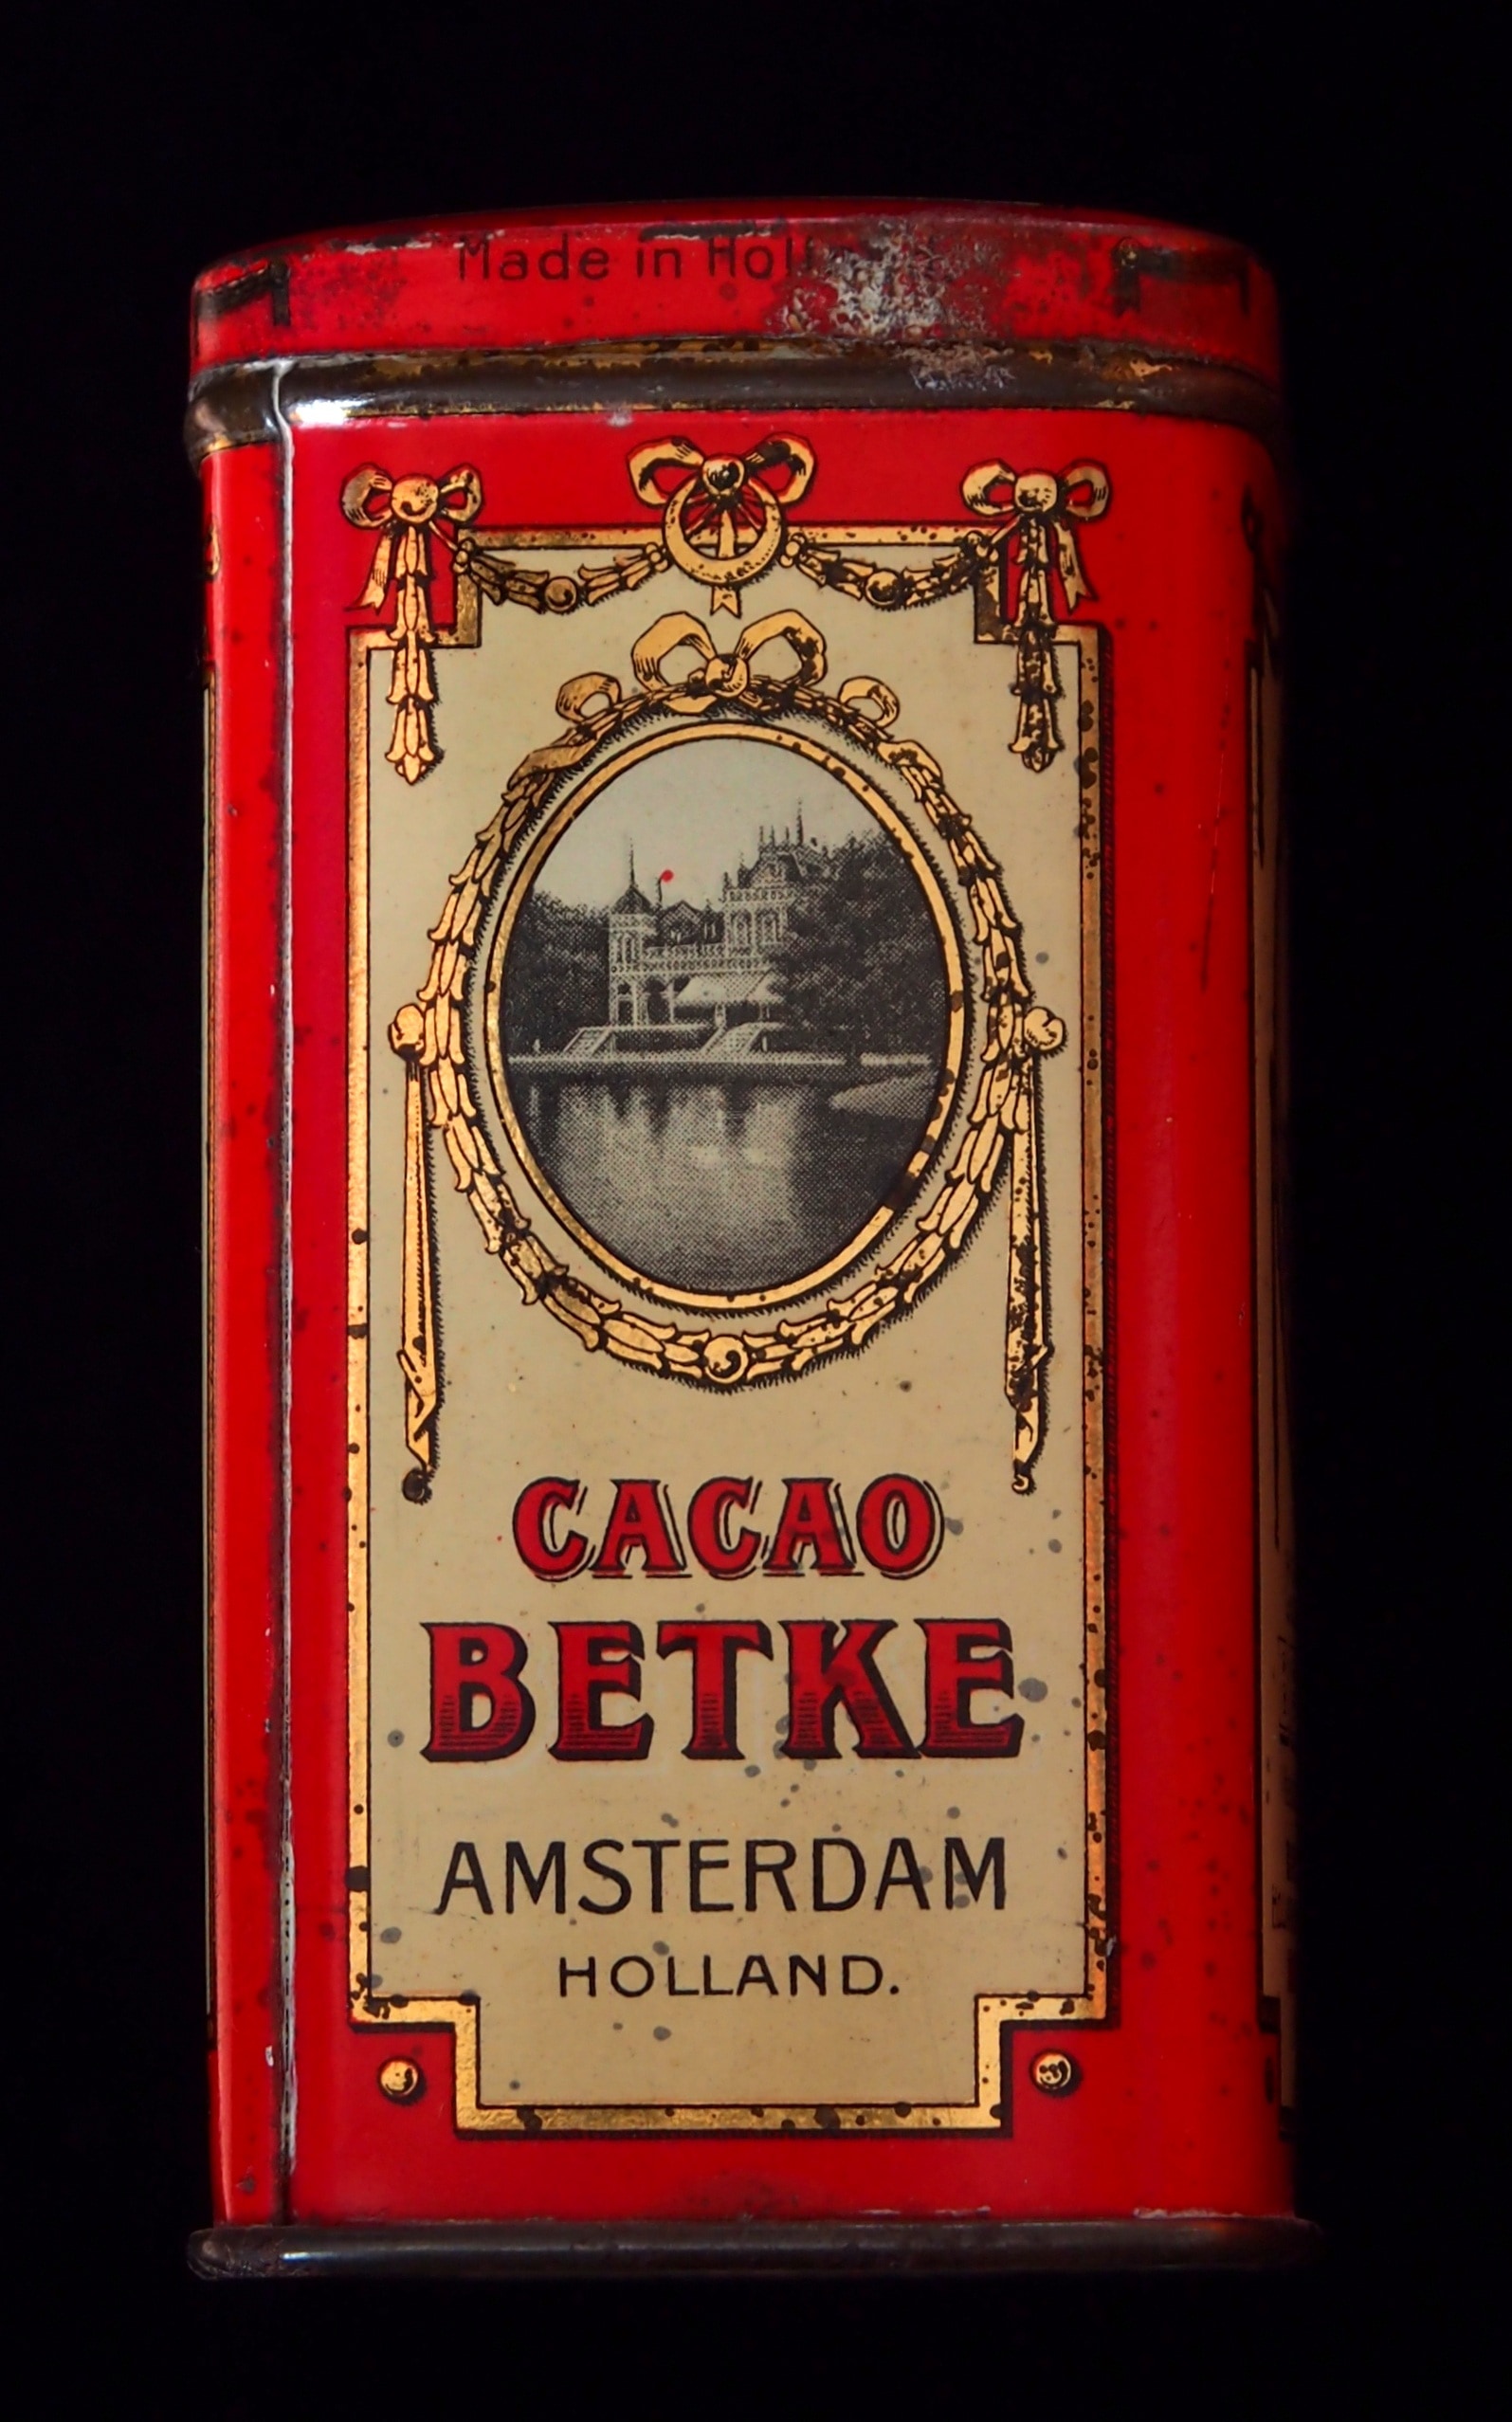 Historic, Box, Cacao, Package, Old, red, text